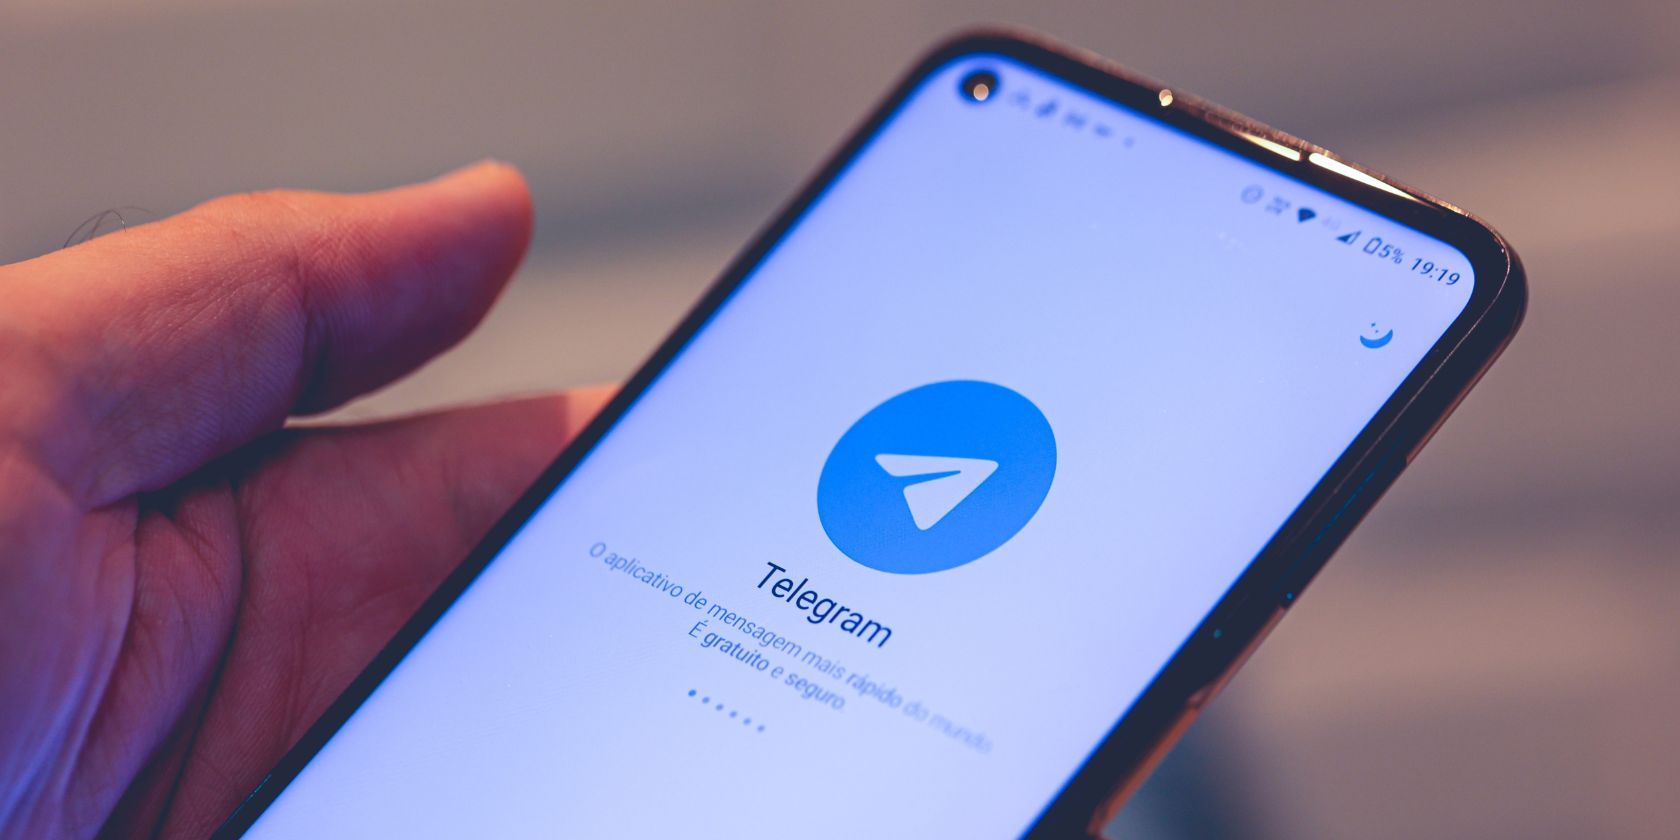 the telegram logo on a smartphone held in someone's hand